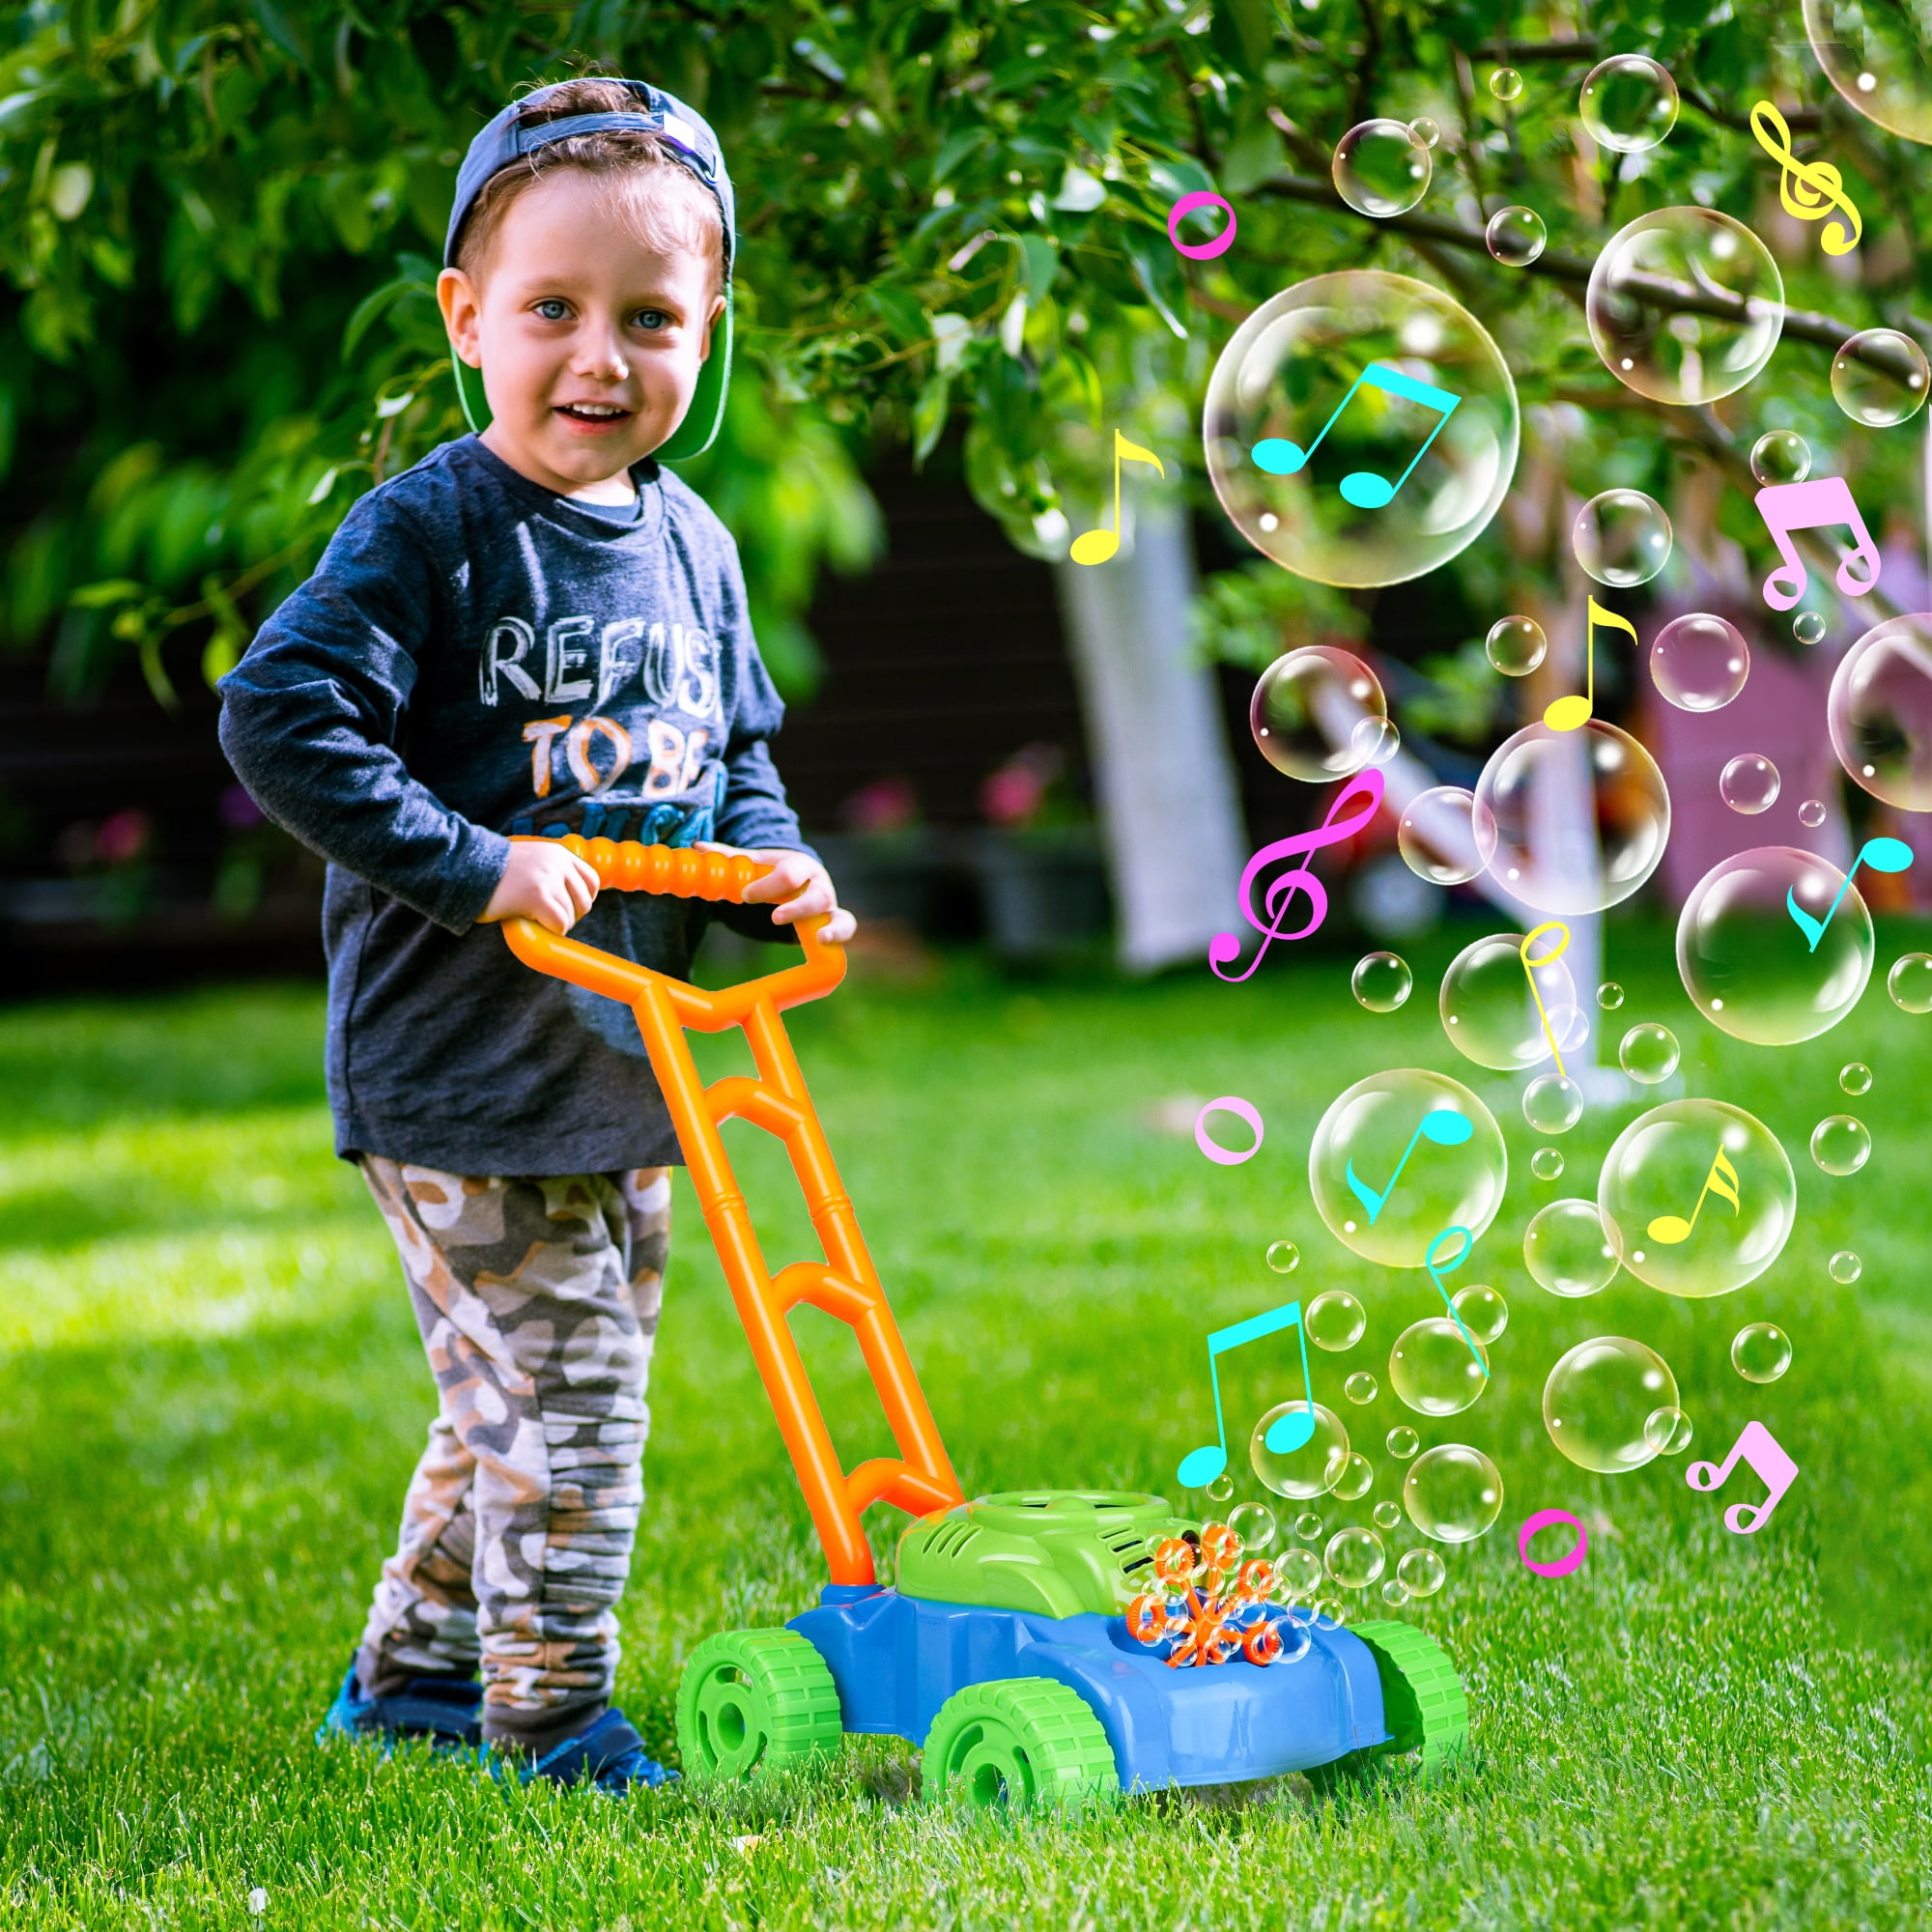 Hot Bee Bubble Lawn Mower for Toddlers, Kids Bubble Blower Maker Machine,  Christmas Party Outdoor Backyard Gardening Toys, Birthday Christmas Gifts